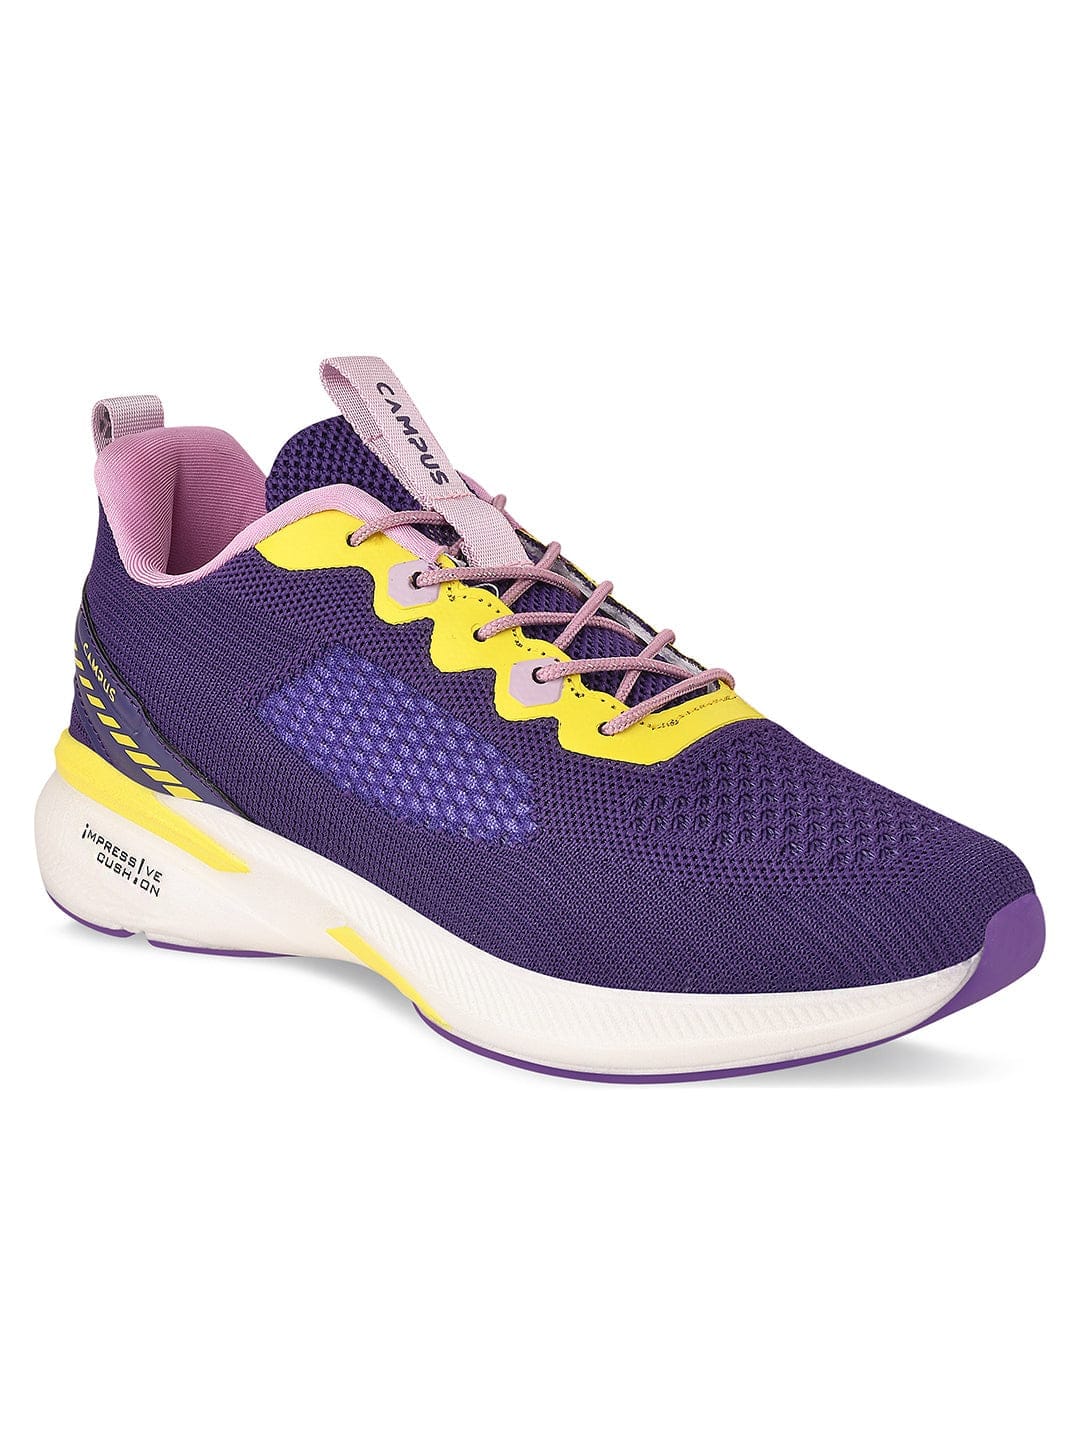 Buy Sneakers For Women: Oliviad-Prpl-Ylo | Campus Shoes